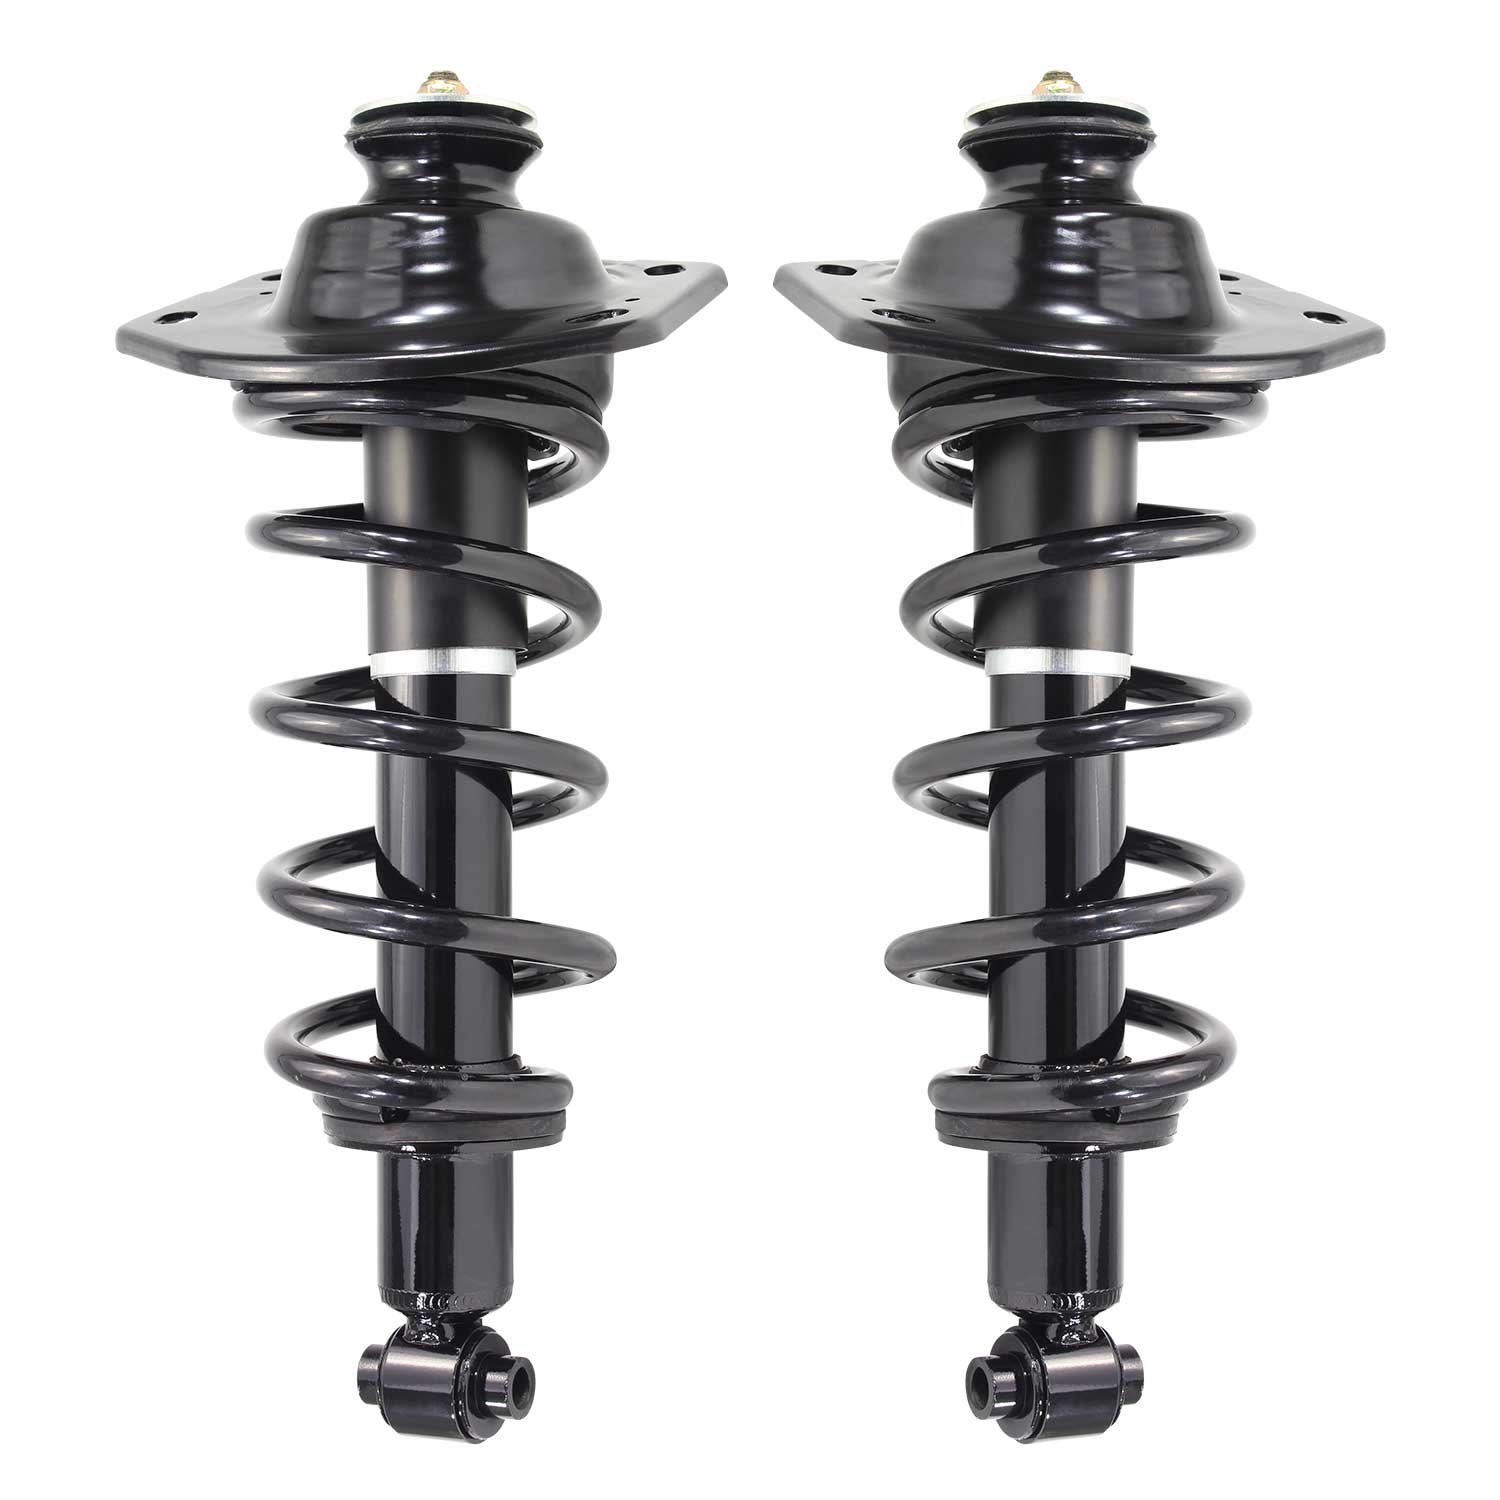 2-15203-15204-001 Suspension Strut & Coil Spring Assembly Set Fits Select Chevy Camaro